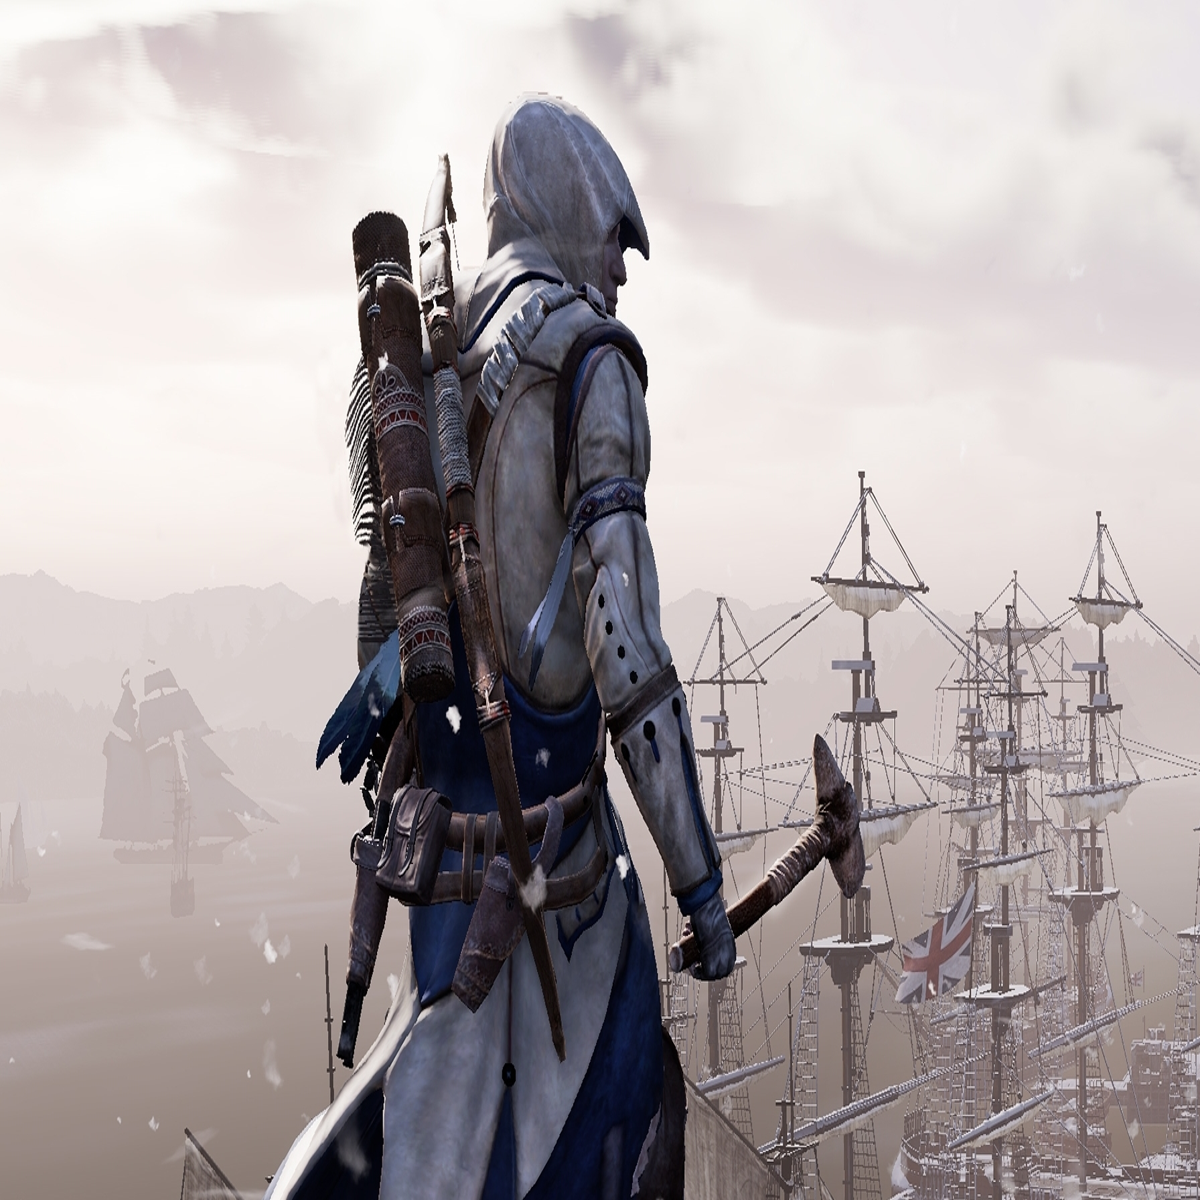 Assassin's Creed 3 Remastered changes revealed, Switch version